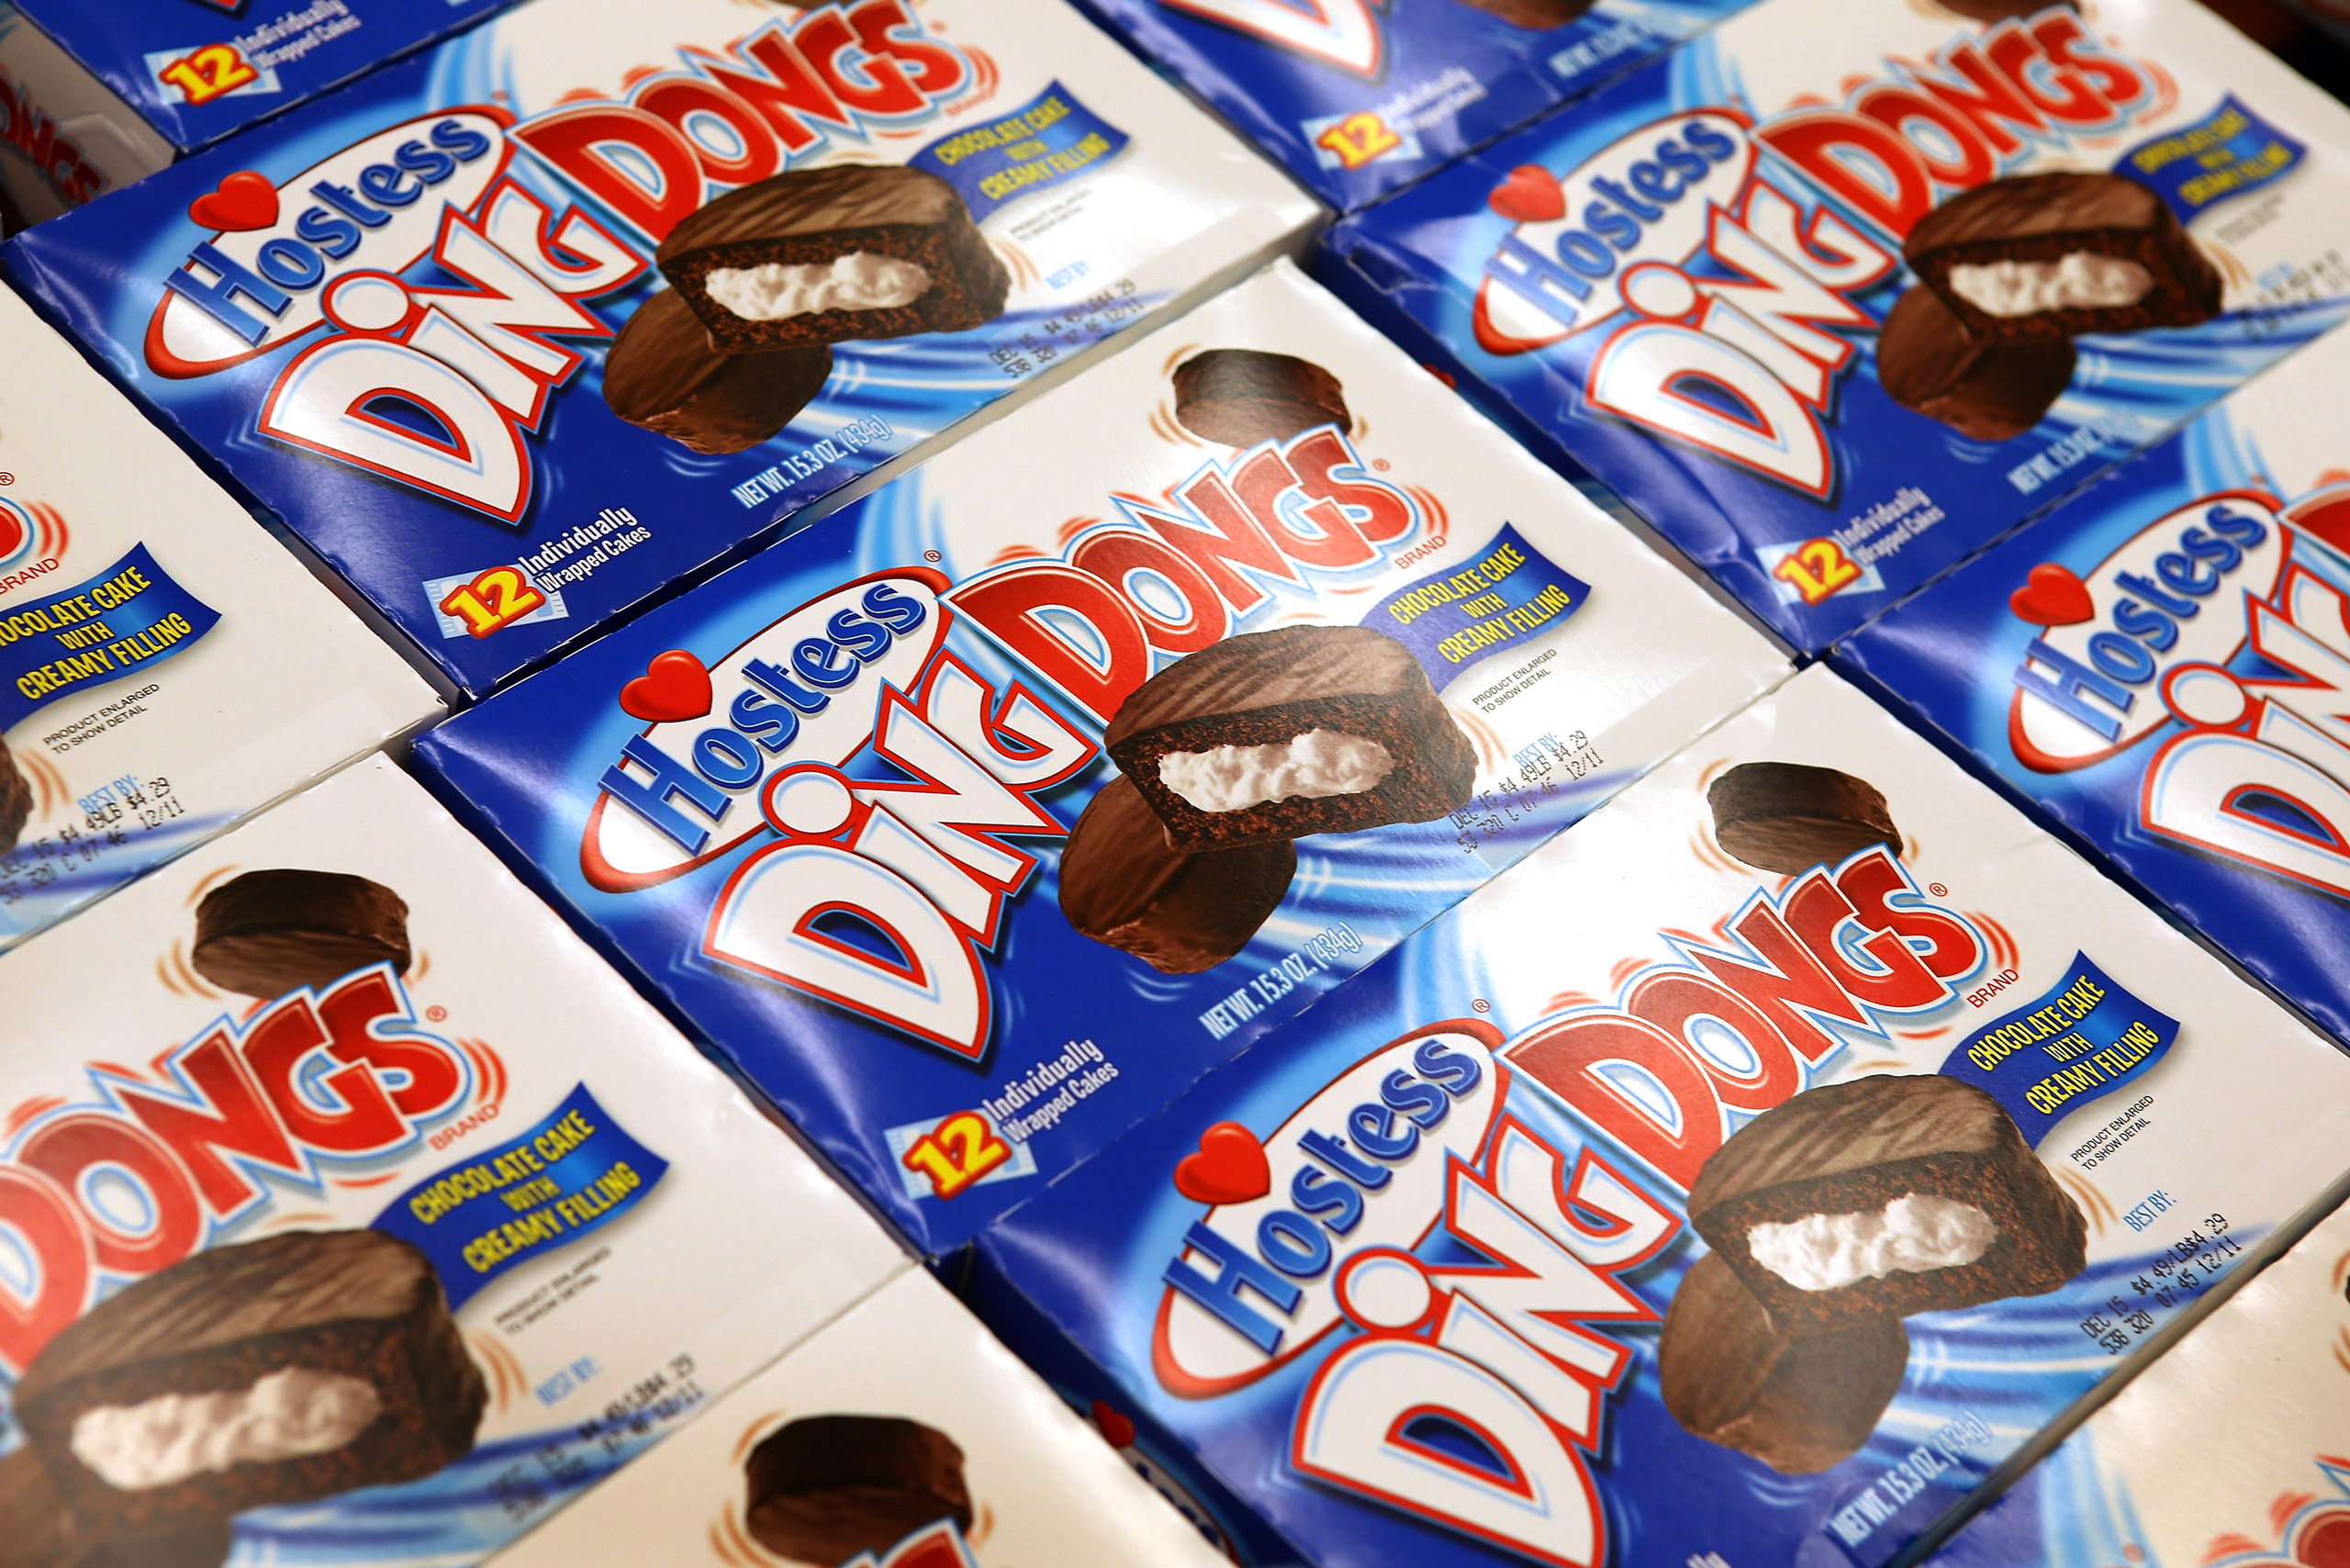 Hostess Ding Dongs are offered for sale at a Jewel-Osco grocery store in Chicago on December 11, 2012. (Scott Olson—Getty Images)